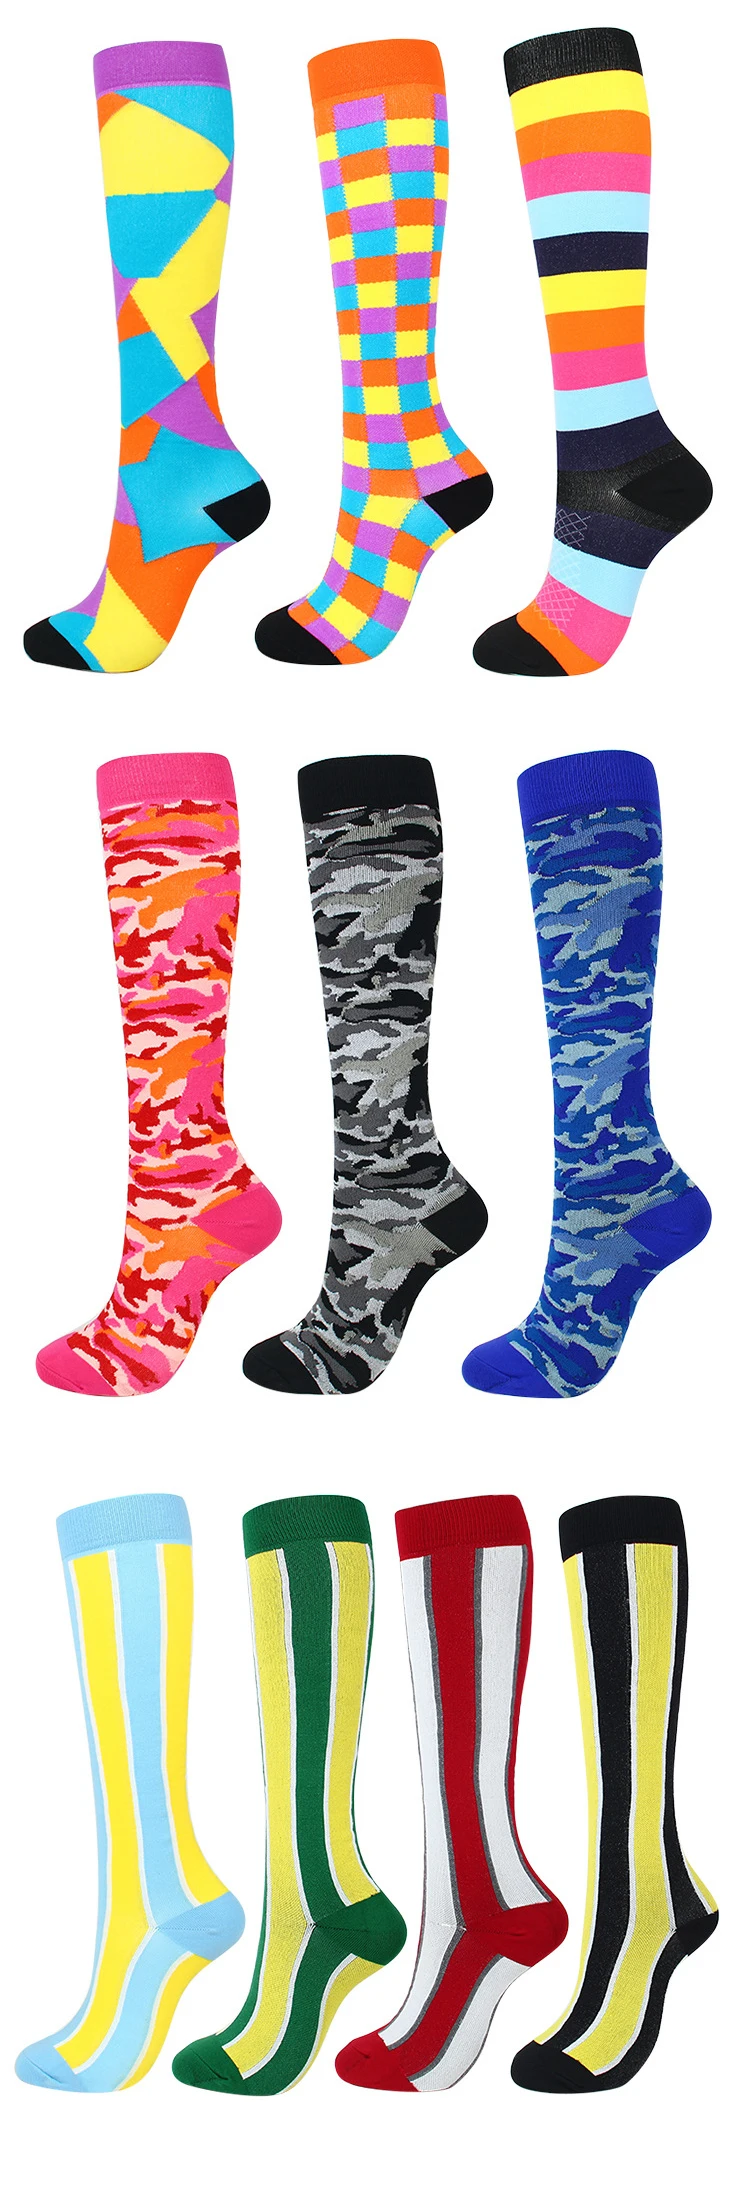 Enerup Running Sockwell Fancy Pressure Sports Recovery And Performance Relief Stocking Men Women'S Compression Socks 23-32mmhg